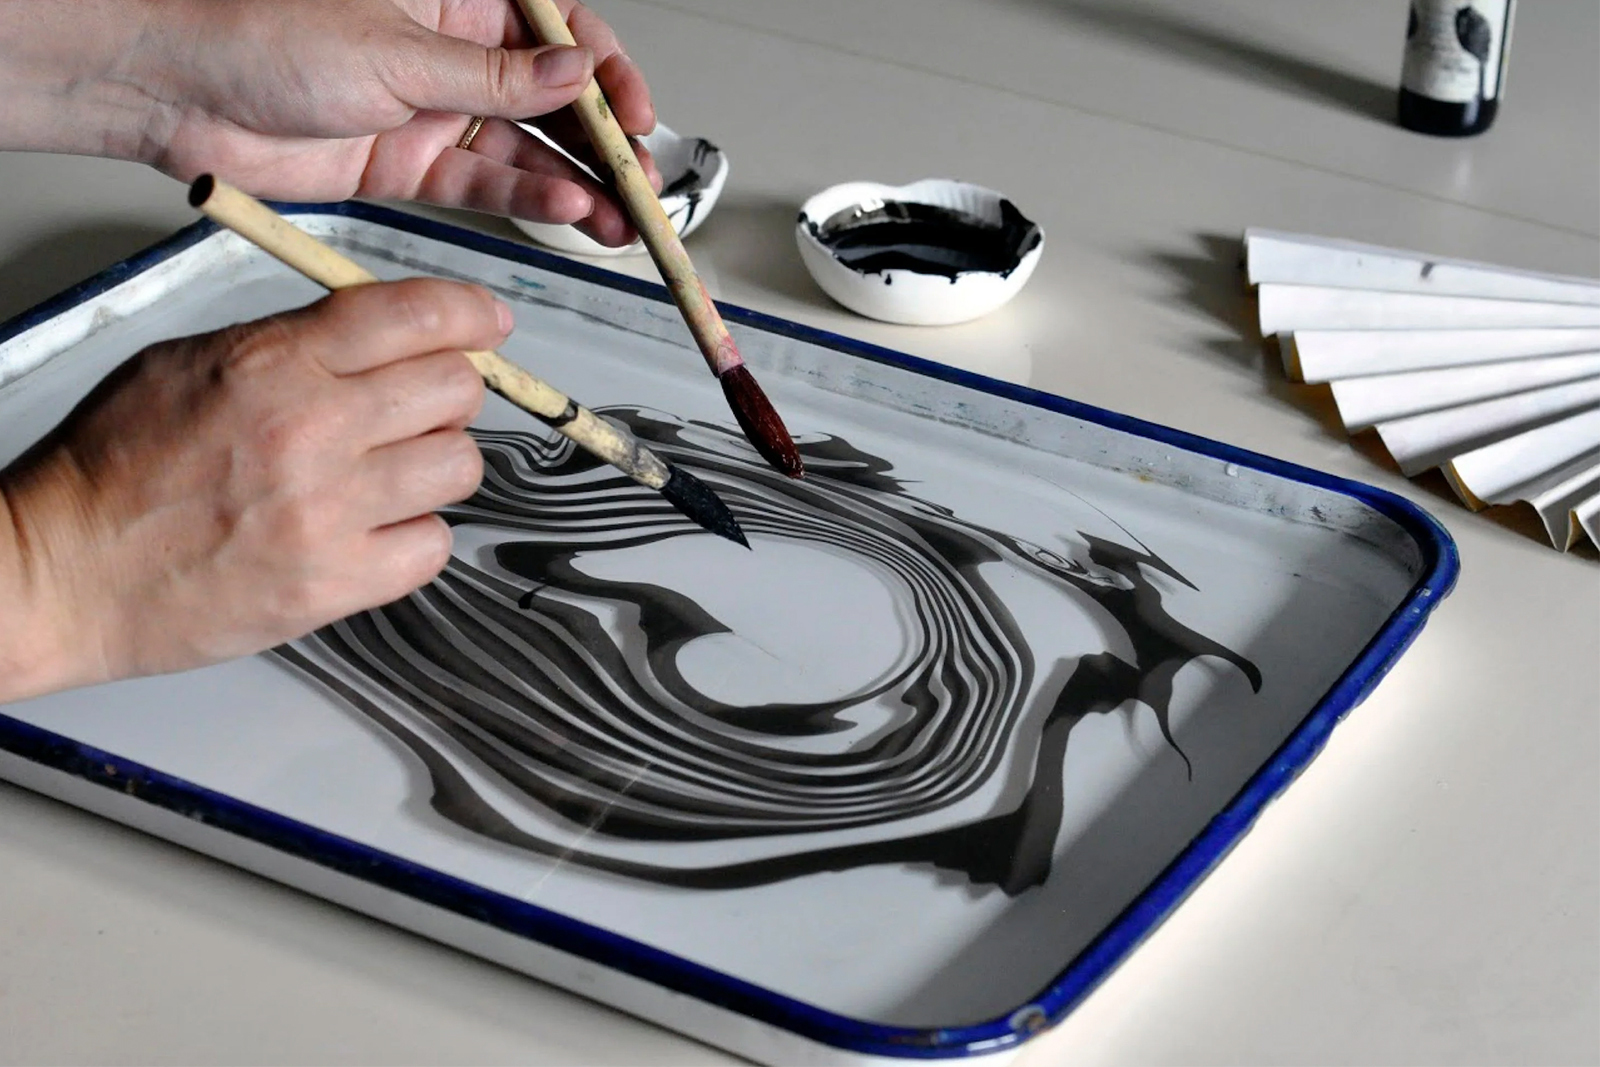 Hands holding brushes over a tray of water with swirls of ink demonstrating paper marbling